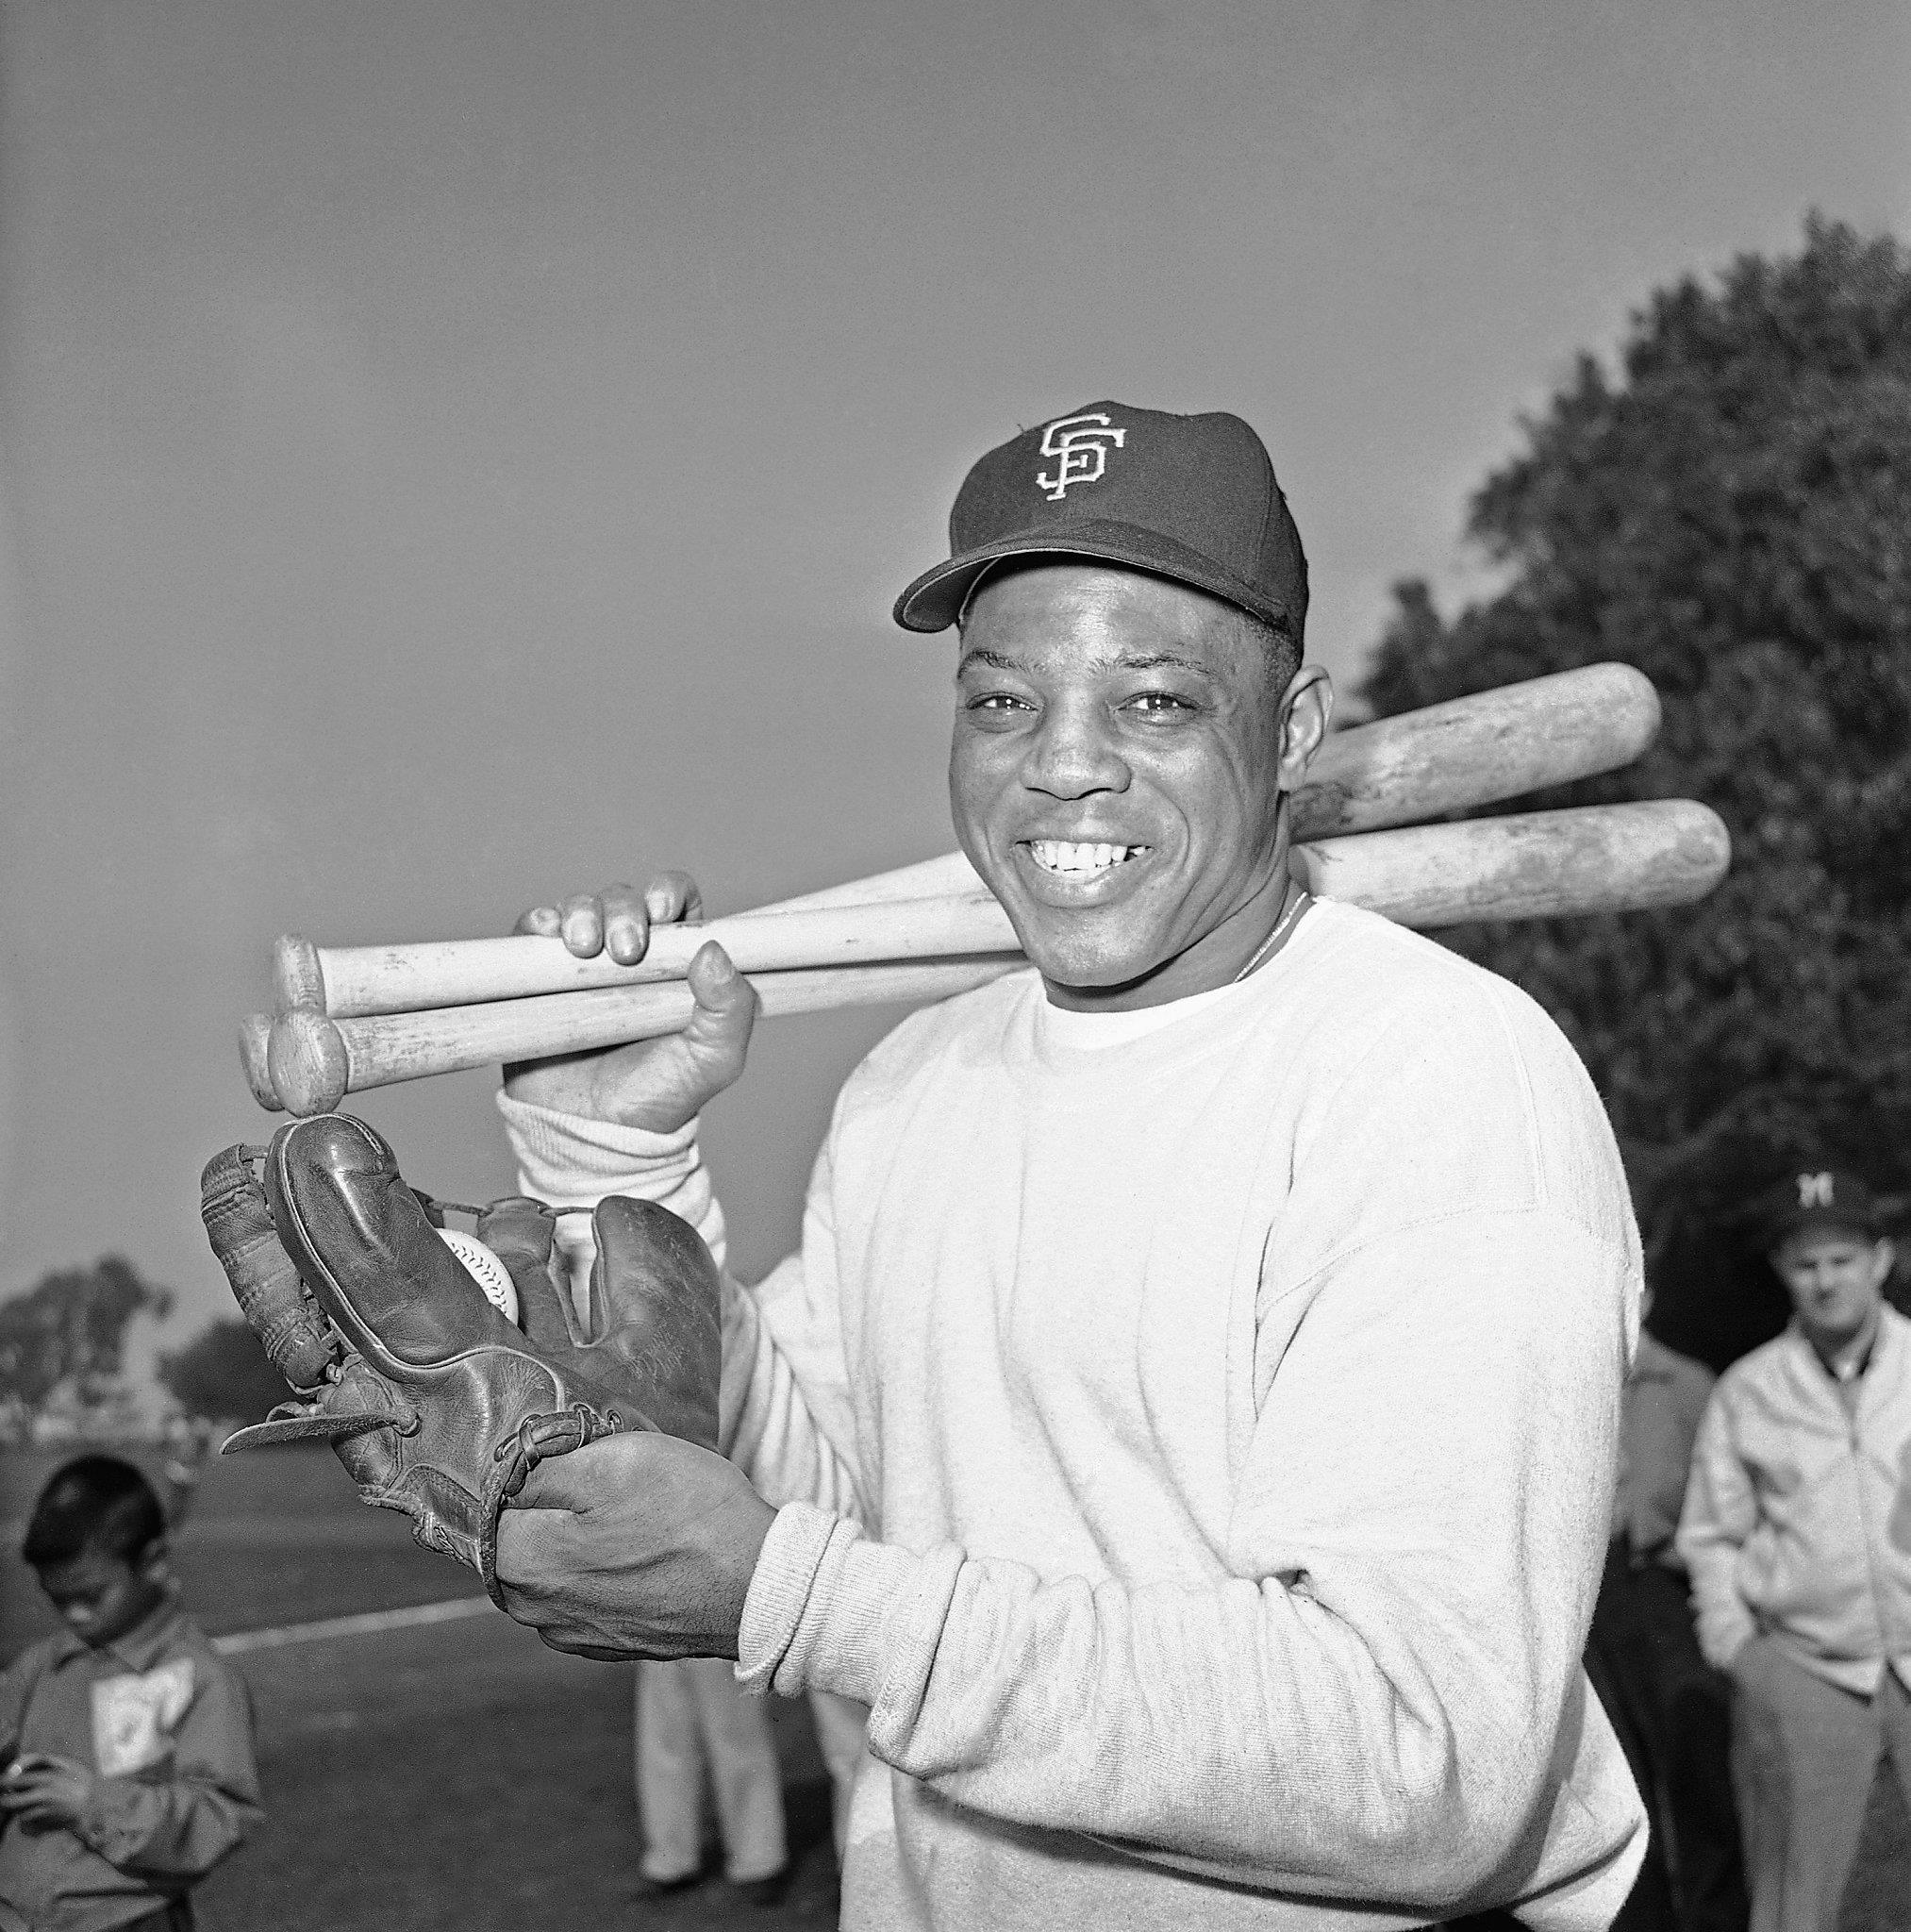 Willie Mays' best stats and accomplishments